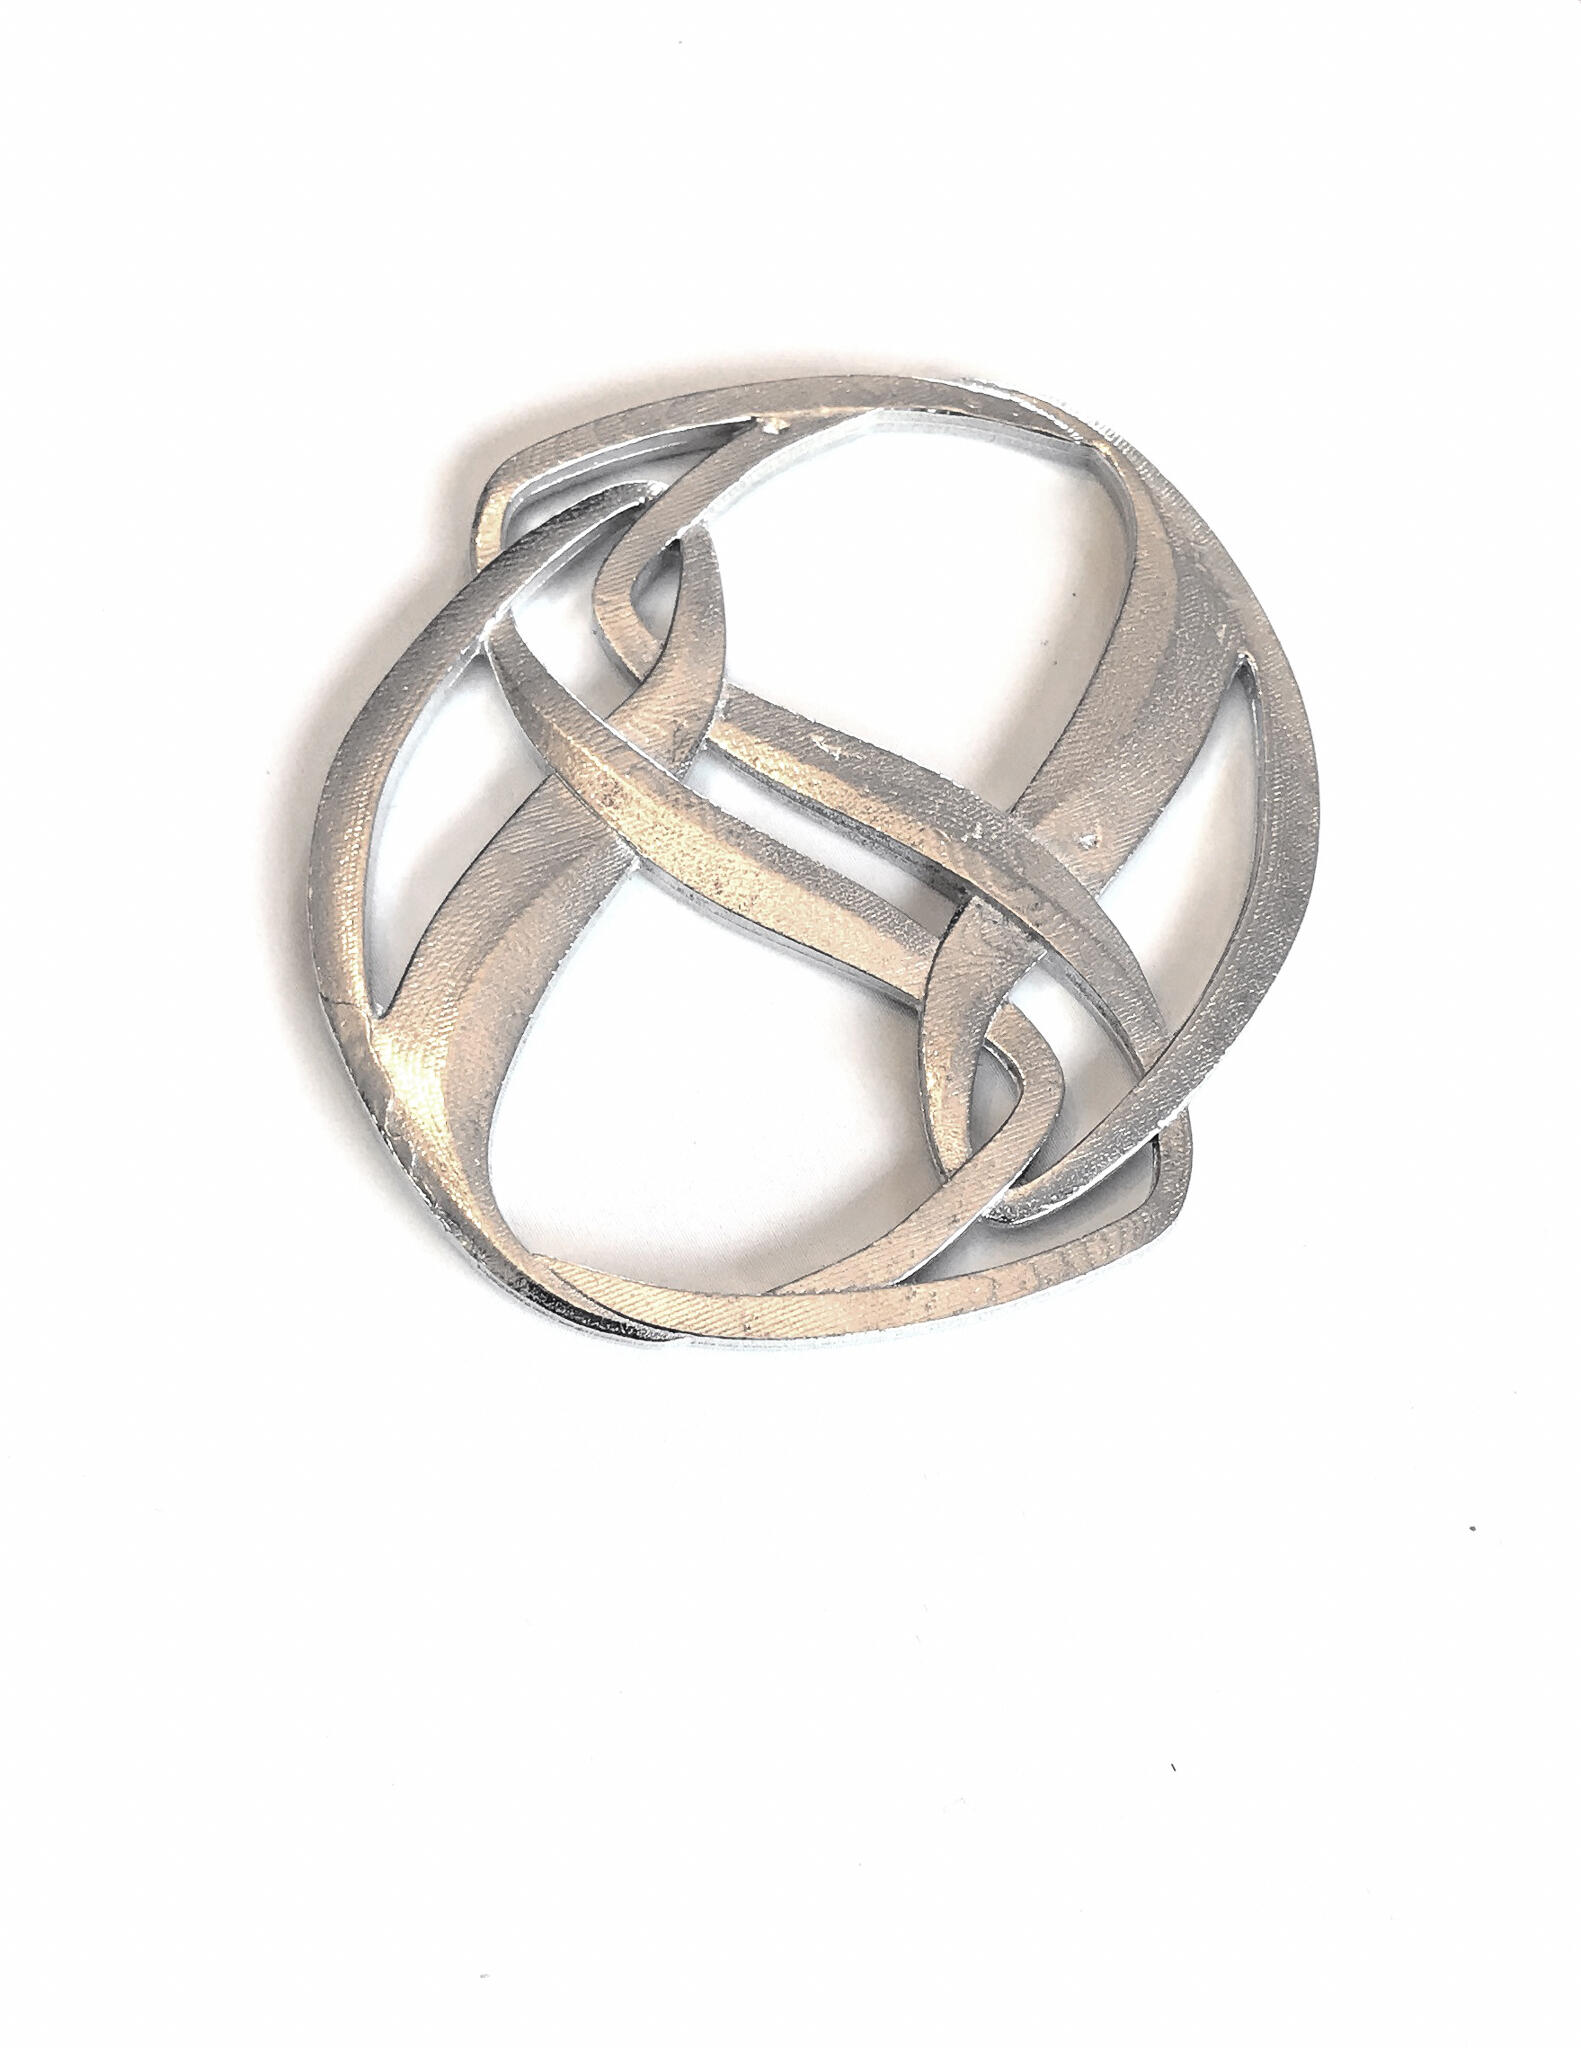 House of Morgan Pewter - Handmade Pewter Scarf Rings - Metal Clip for Women  Scarves (Infinity Scarf Ring)